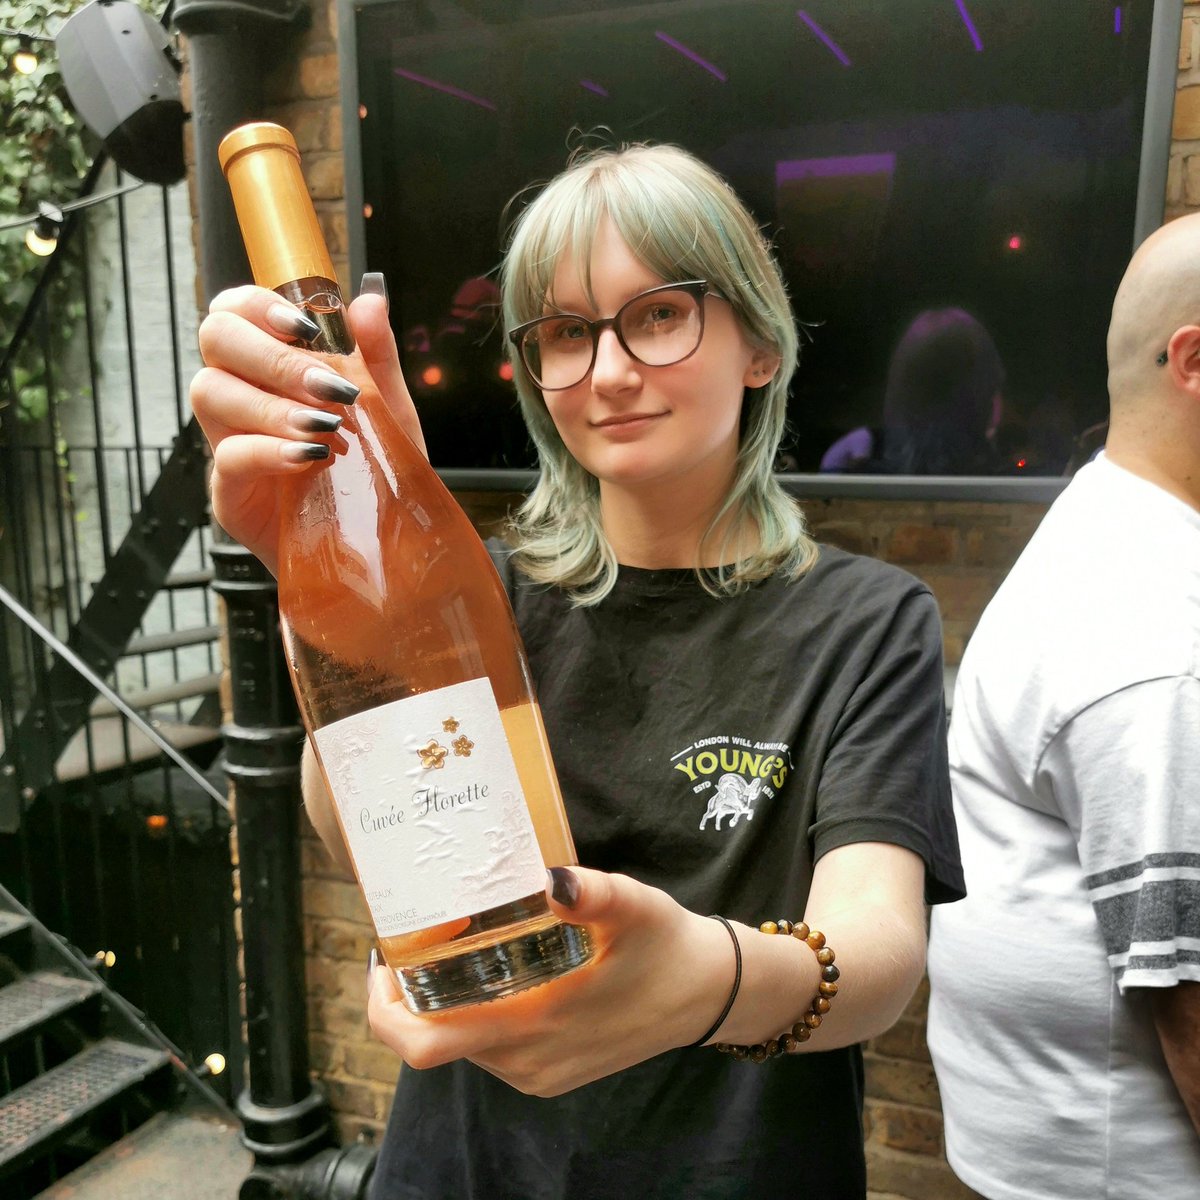 This Saturday's word is Rosé so spread the word to your friends and grab a bottle at the bar!
#rose #wine #rosewine #cotesdeprovence #frenchwine #provence #grapes #friends #family #drinks #saturday #weekend #saturdayvibes #saturdaymood #party #pubterrace #pubwithgarden #pubgarden